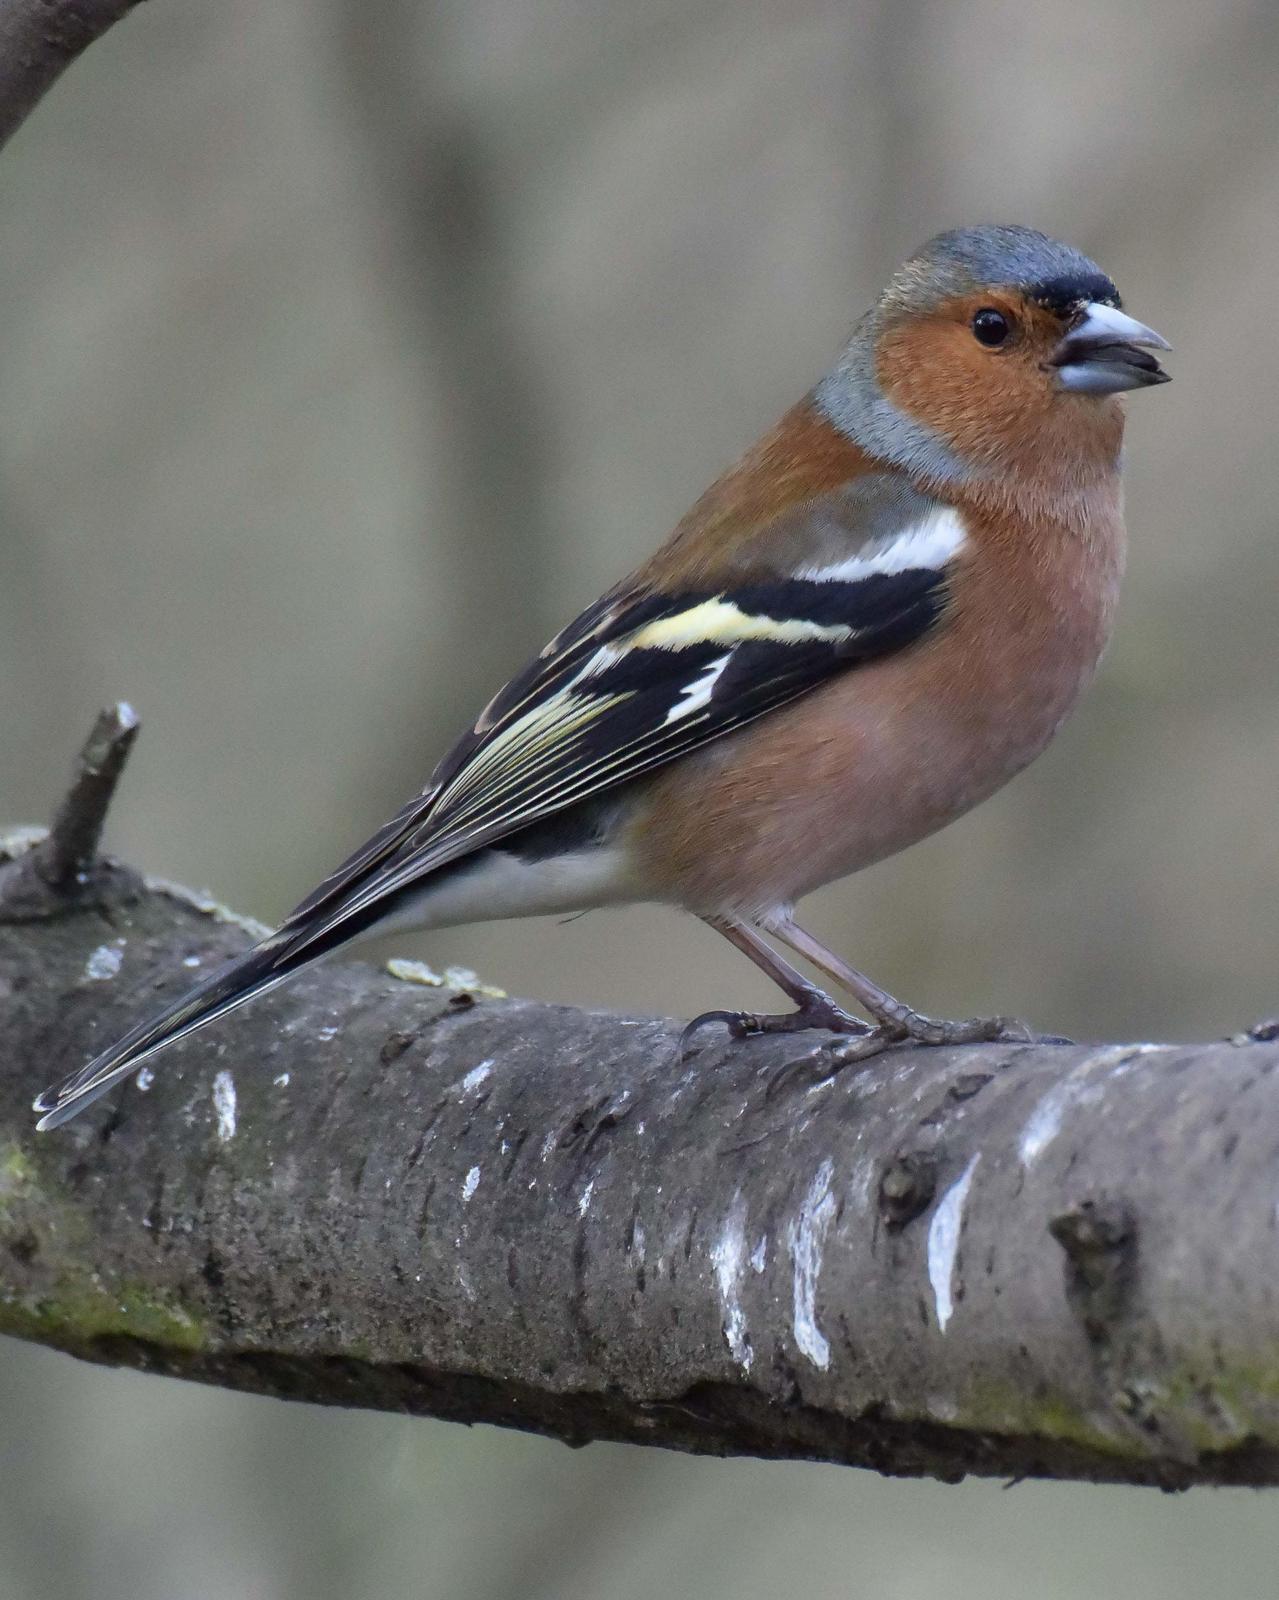 Common Chaffinch Photo by Steve Percival